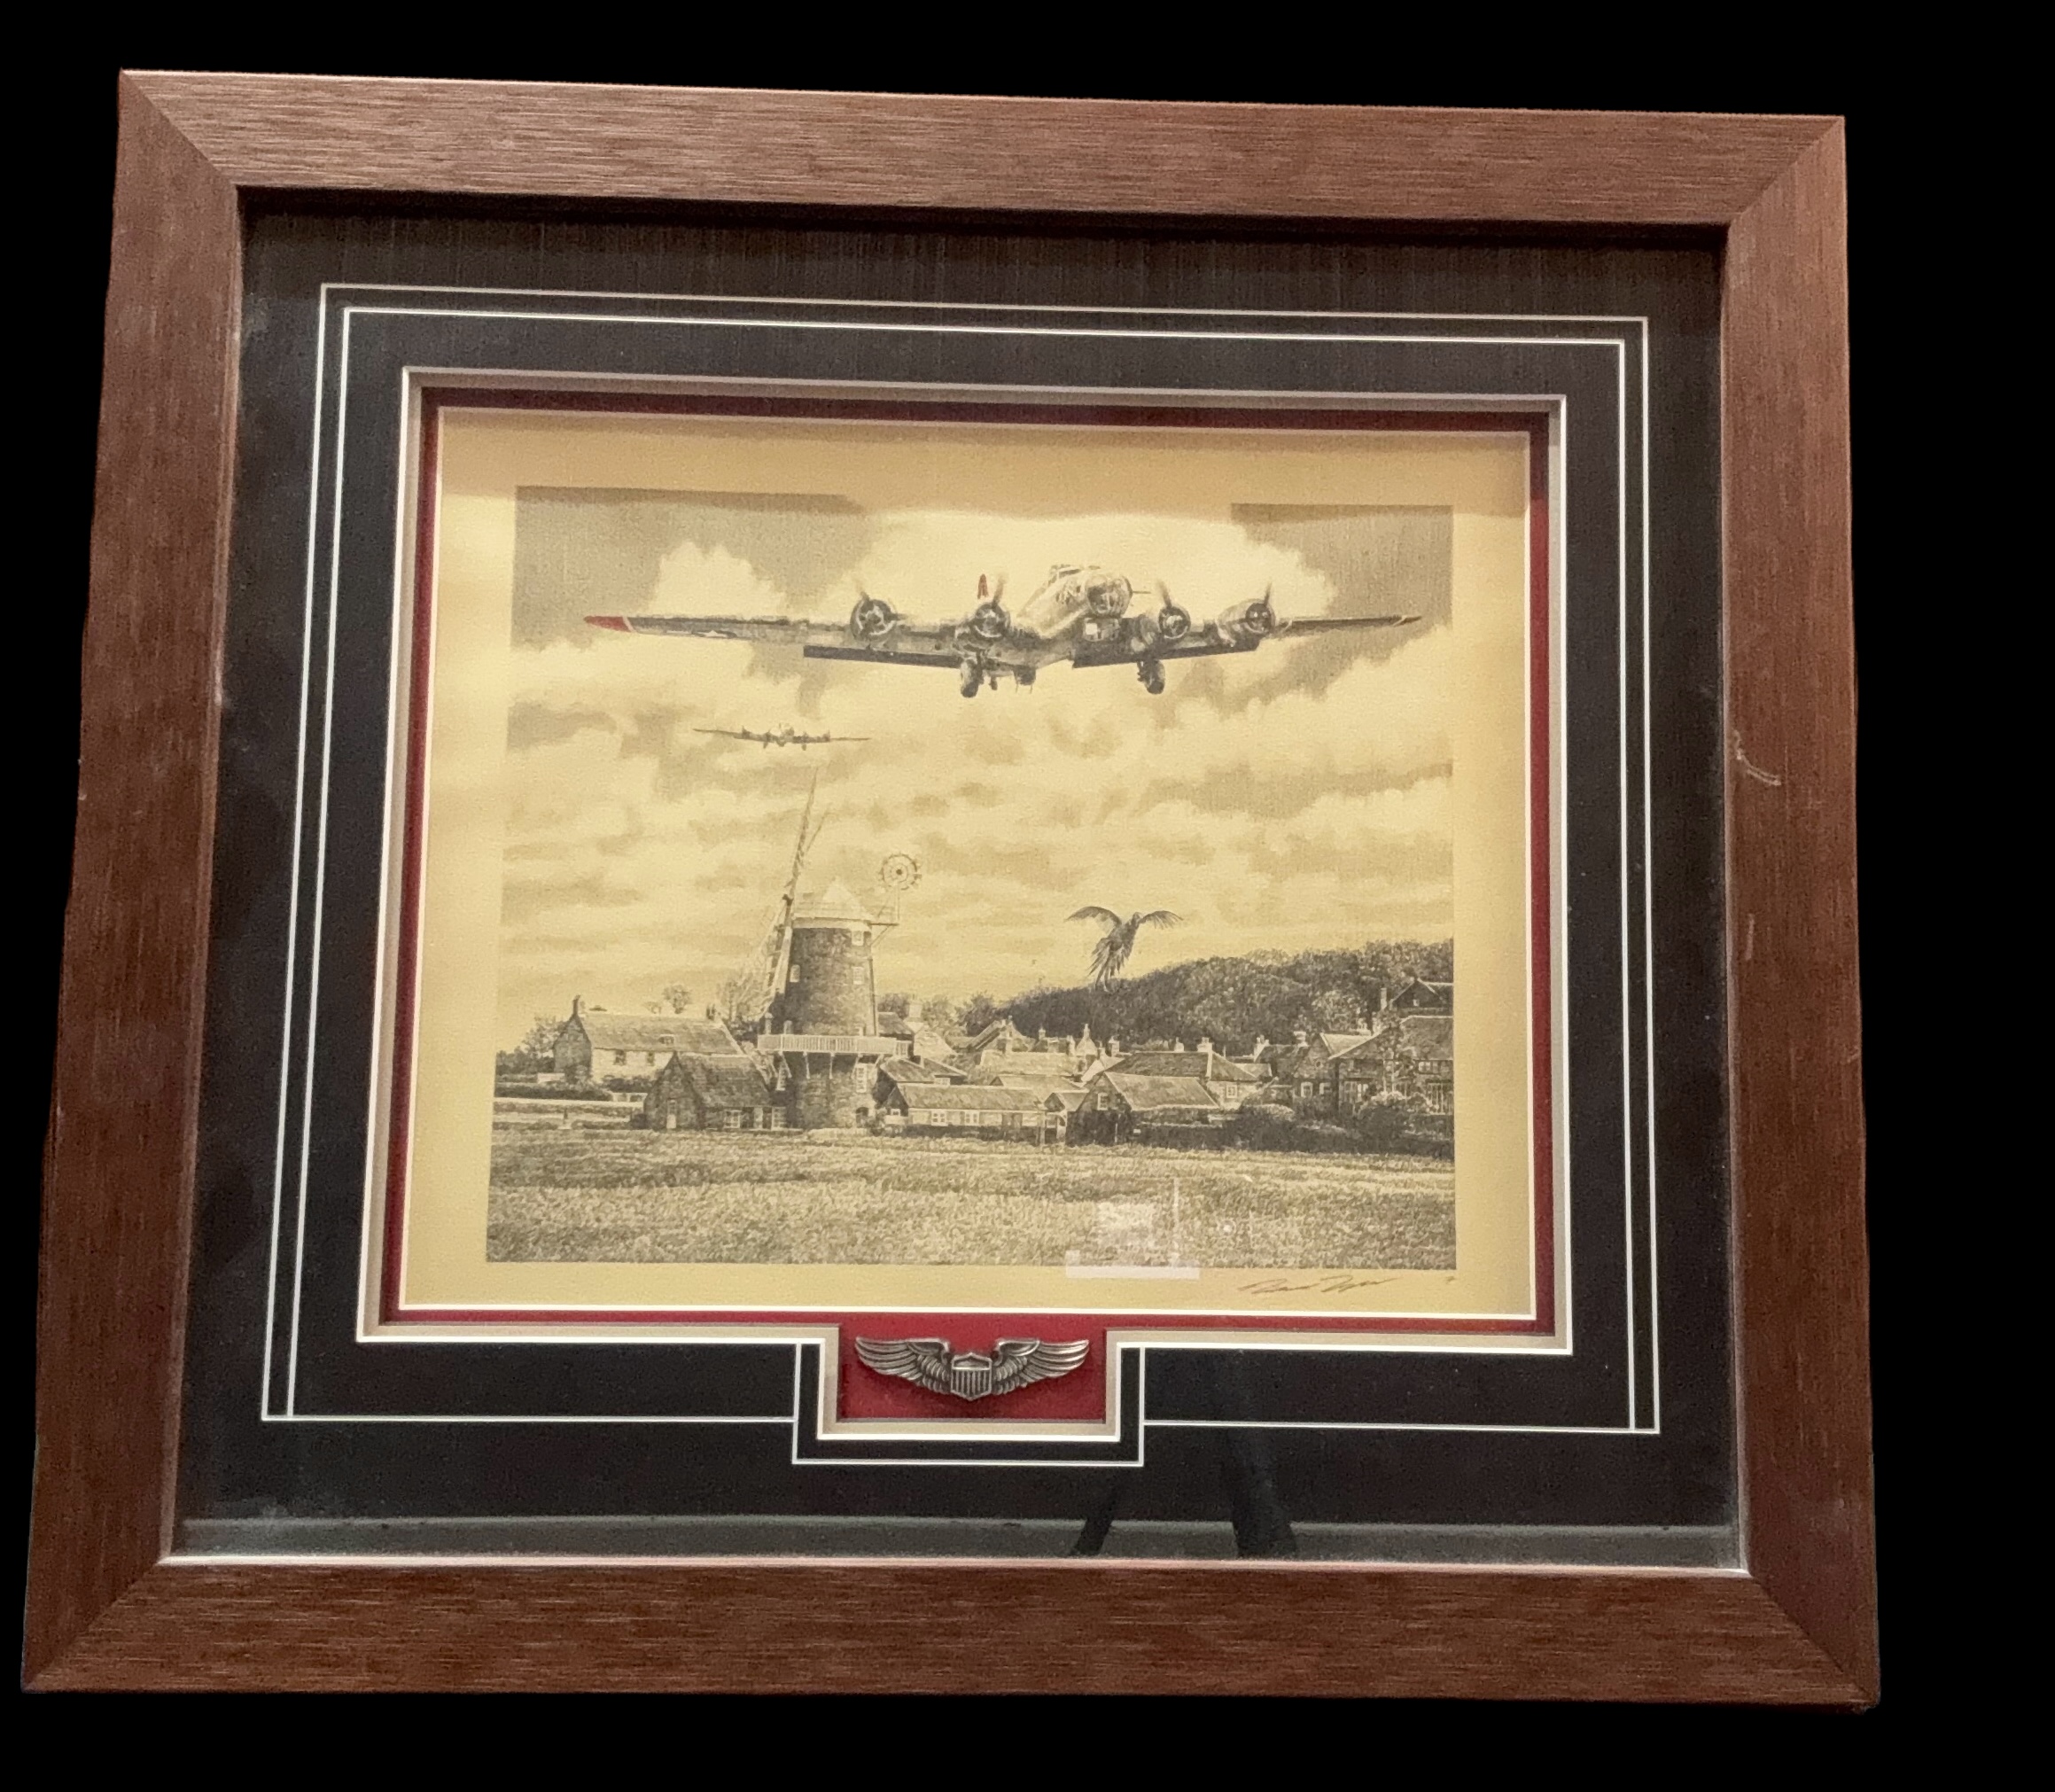 USAF B17 Bomber WWII print 24x22 inch framed and mounted signed in pencil by the artist Robert - Image 3 of 3